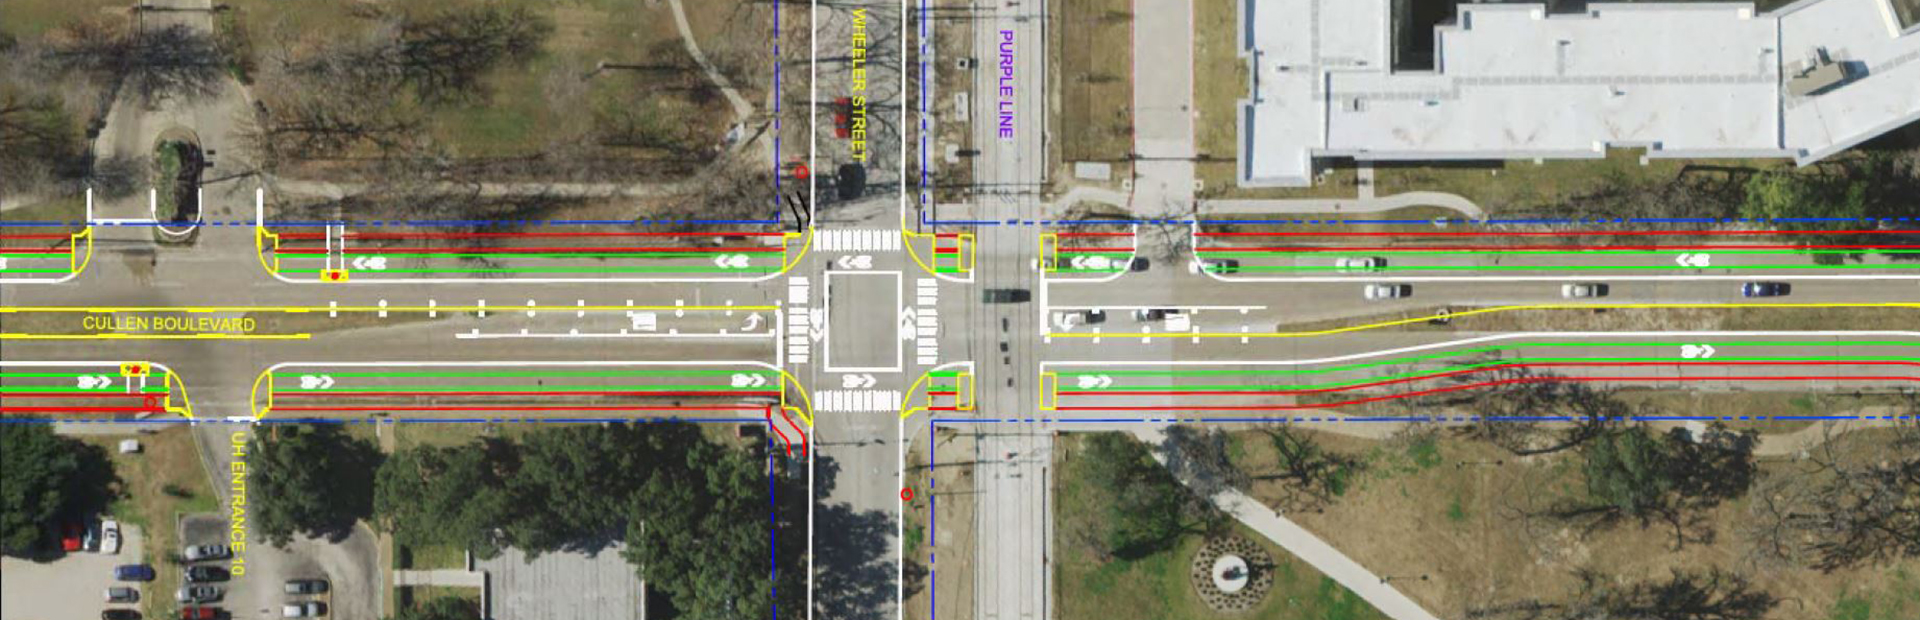 Cullen Boulevard conceptual schematic with new bike lanes